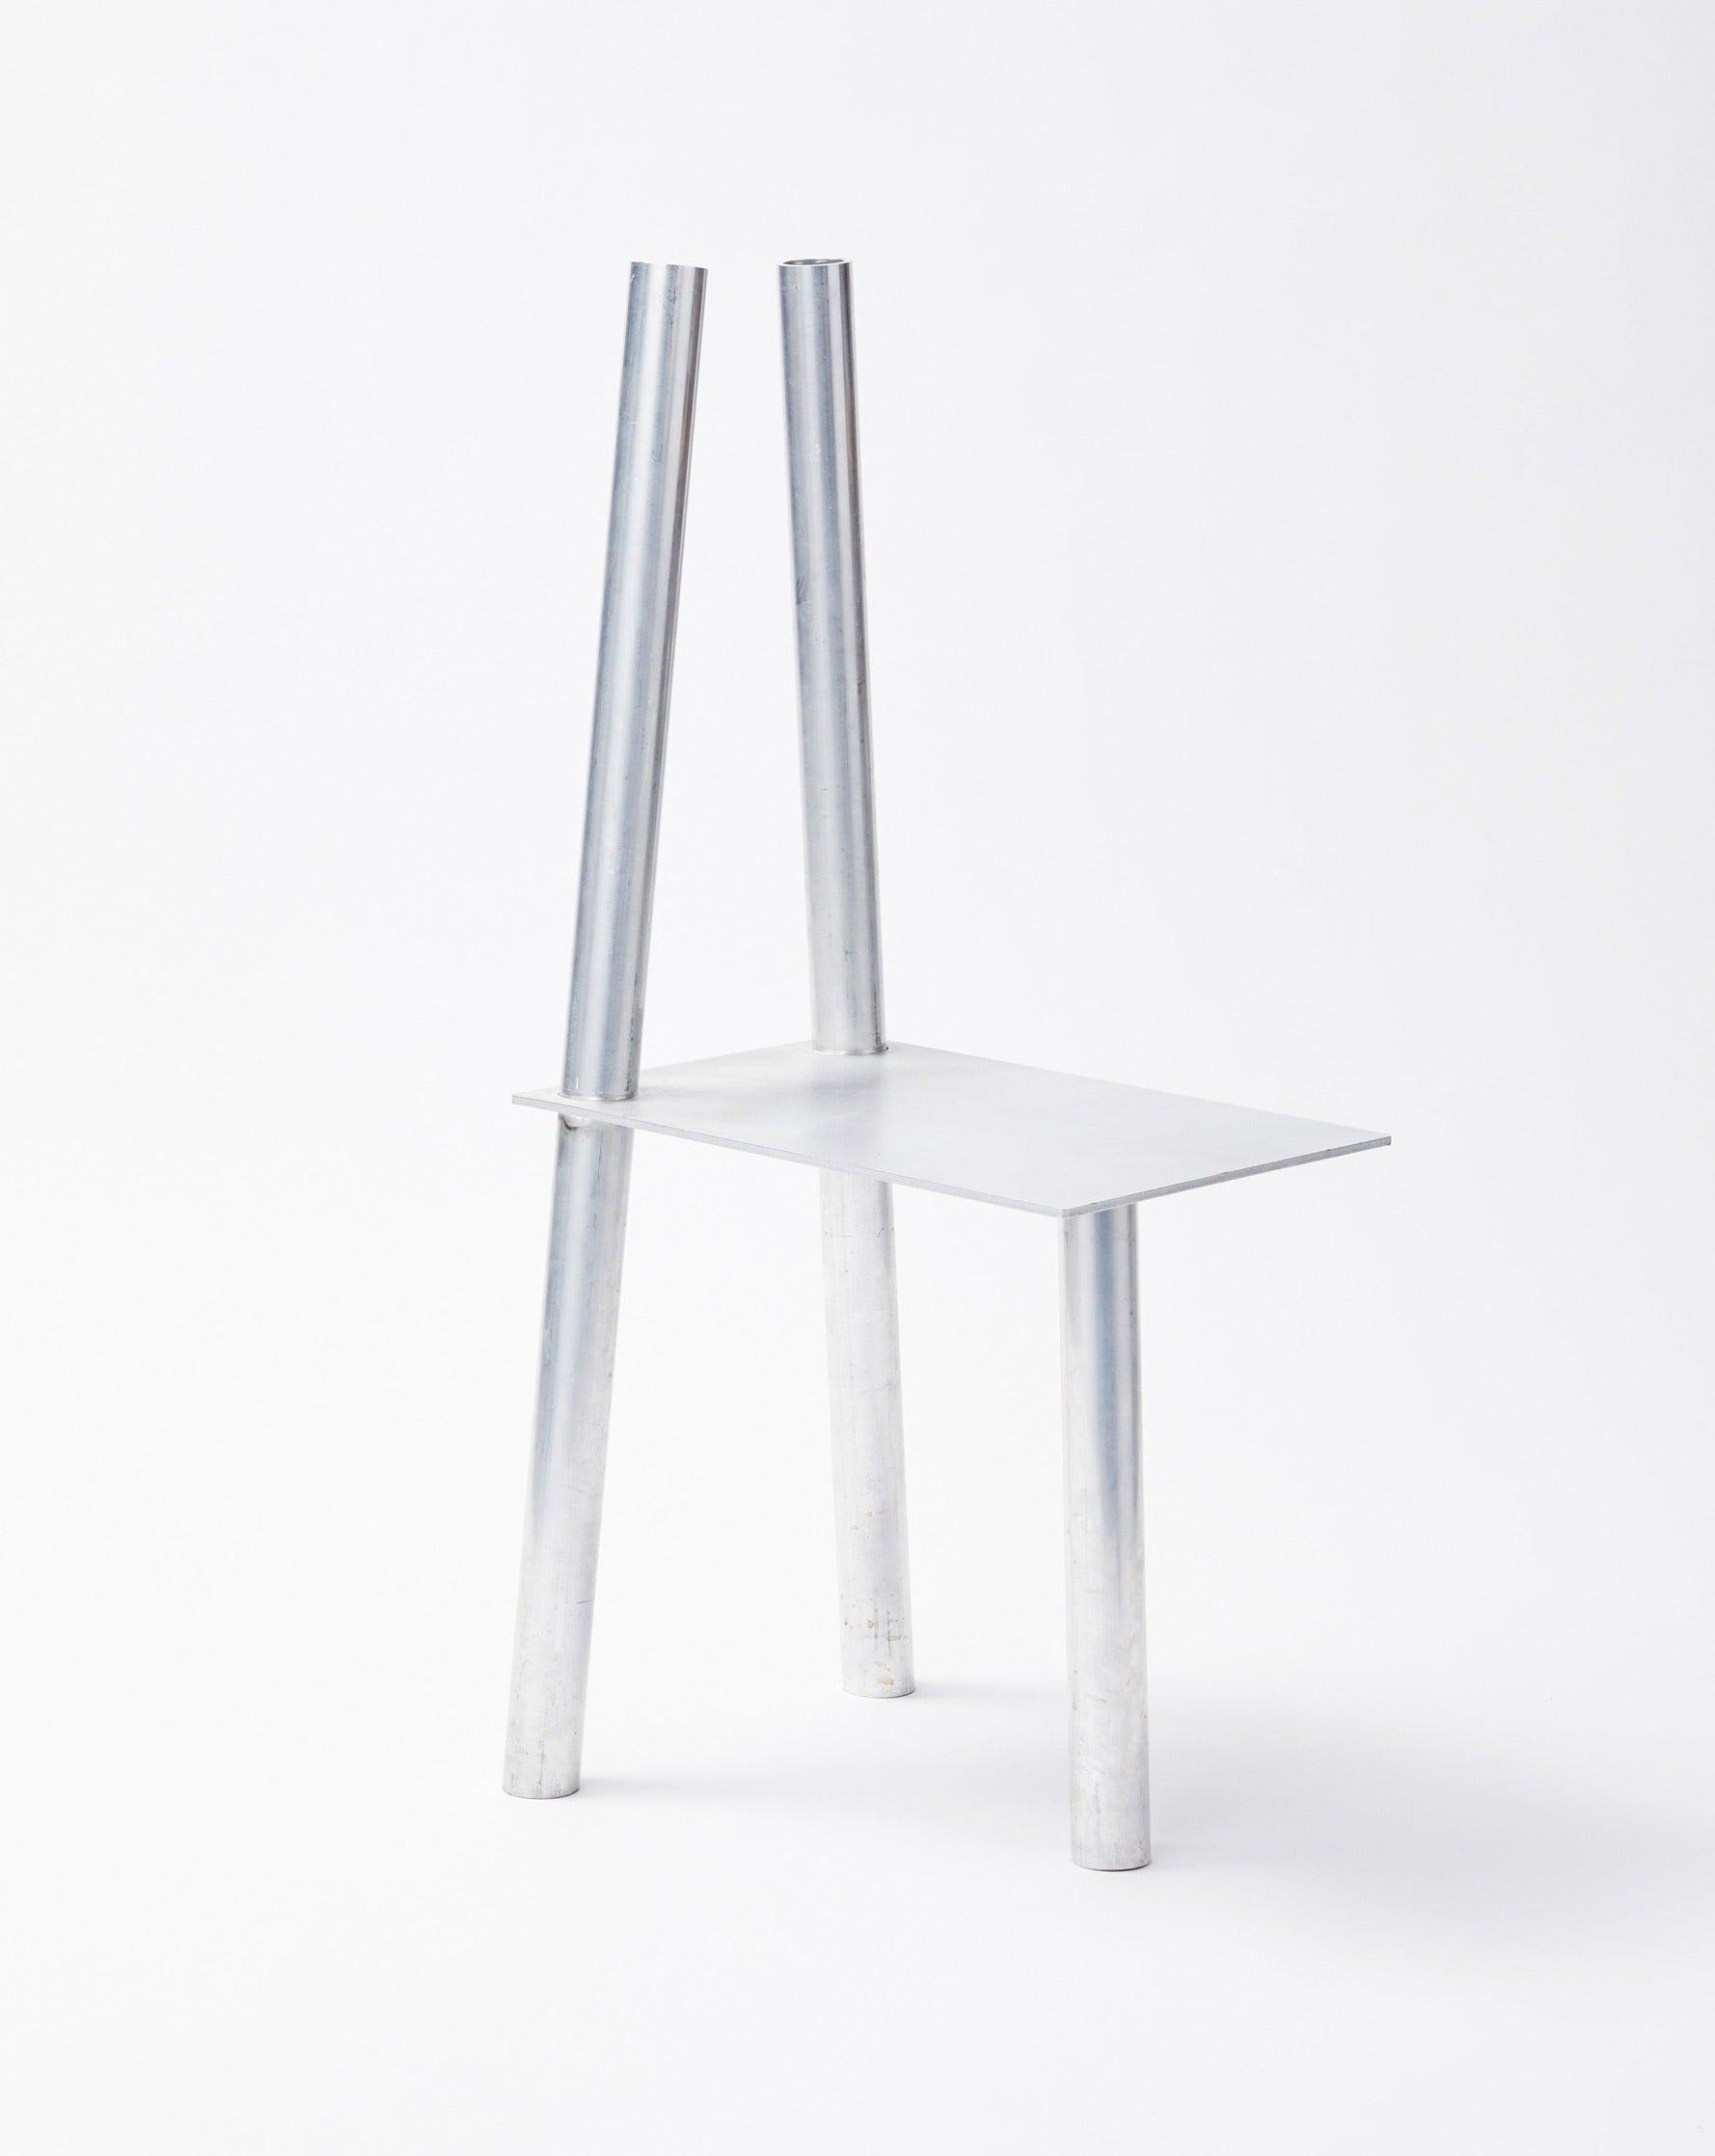 White background, decorative aluminum chair P-L series in an inclined position